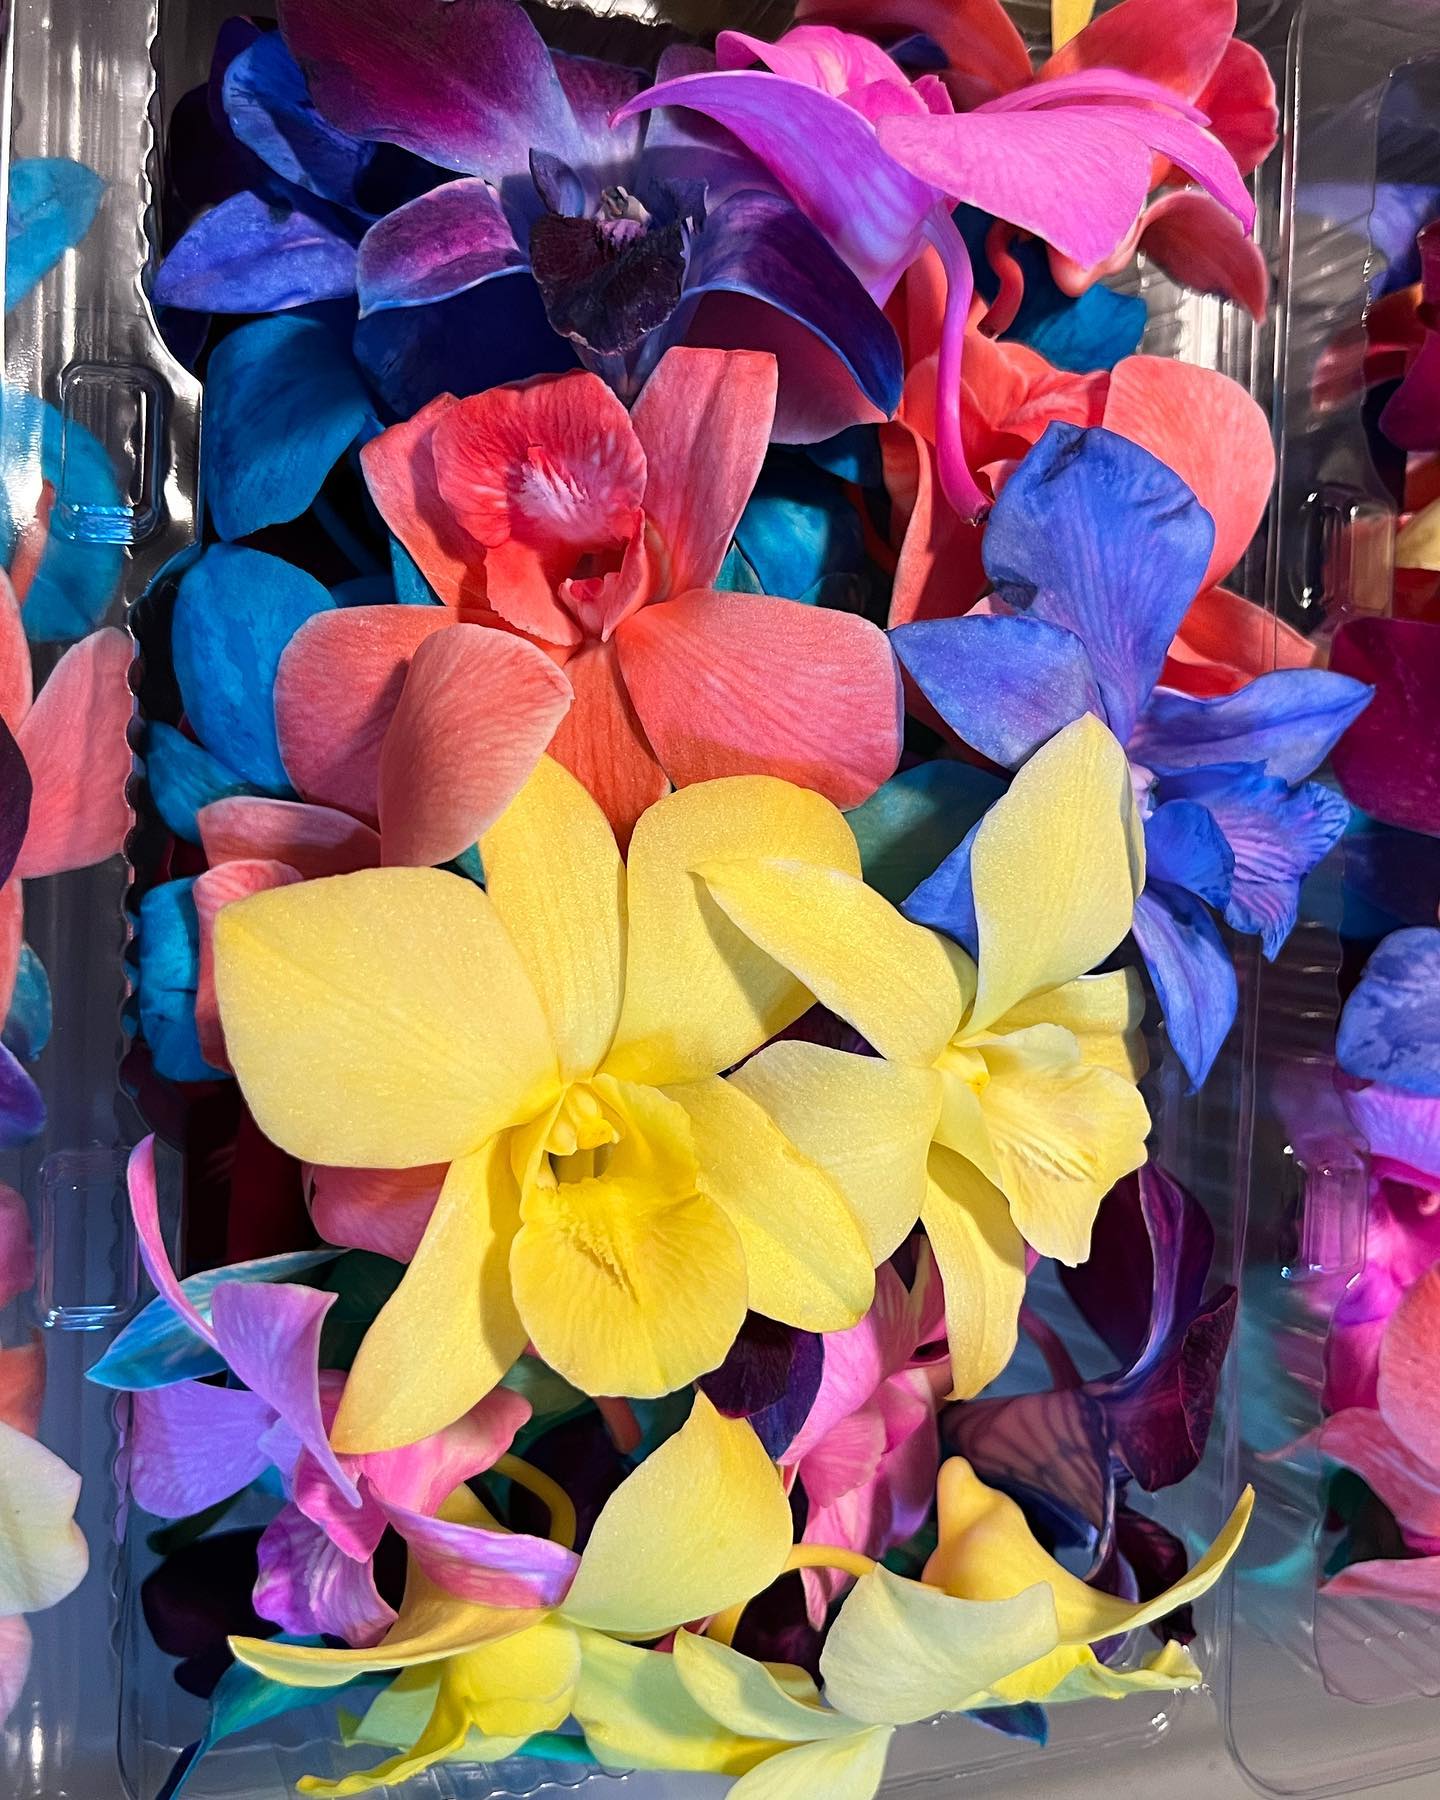 50 All Yellow DYED Orchid Loose Bloom Fresh Cut Flowers Bundle Build A Box